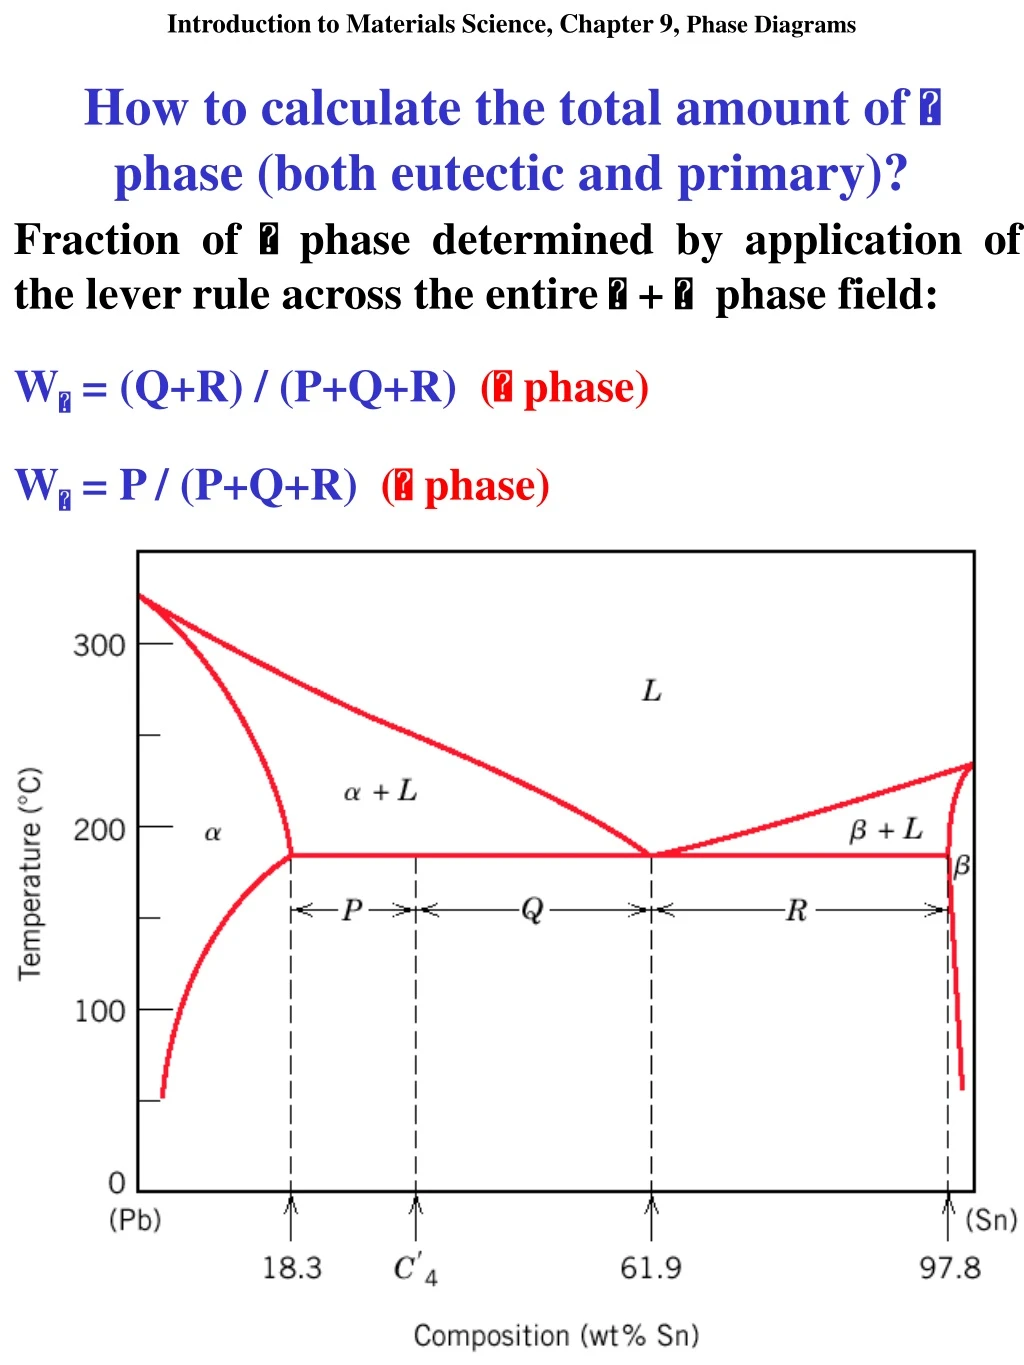 how to calculate the total amount of phase both